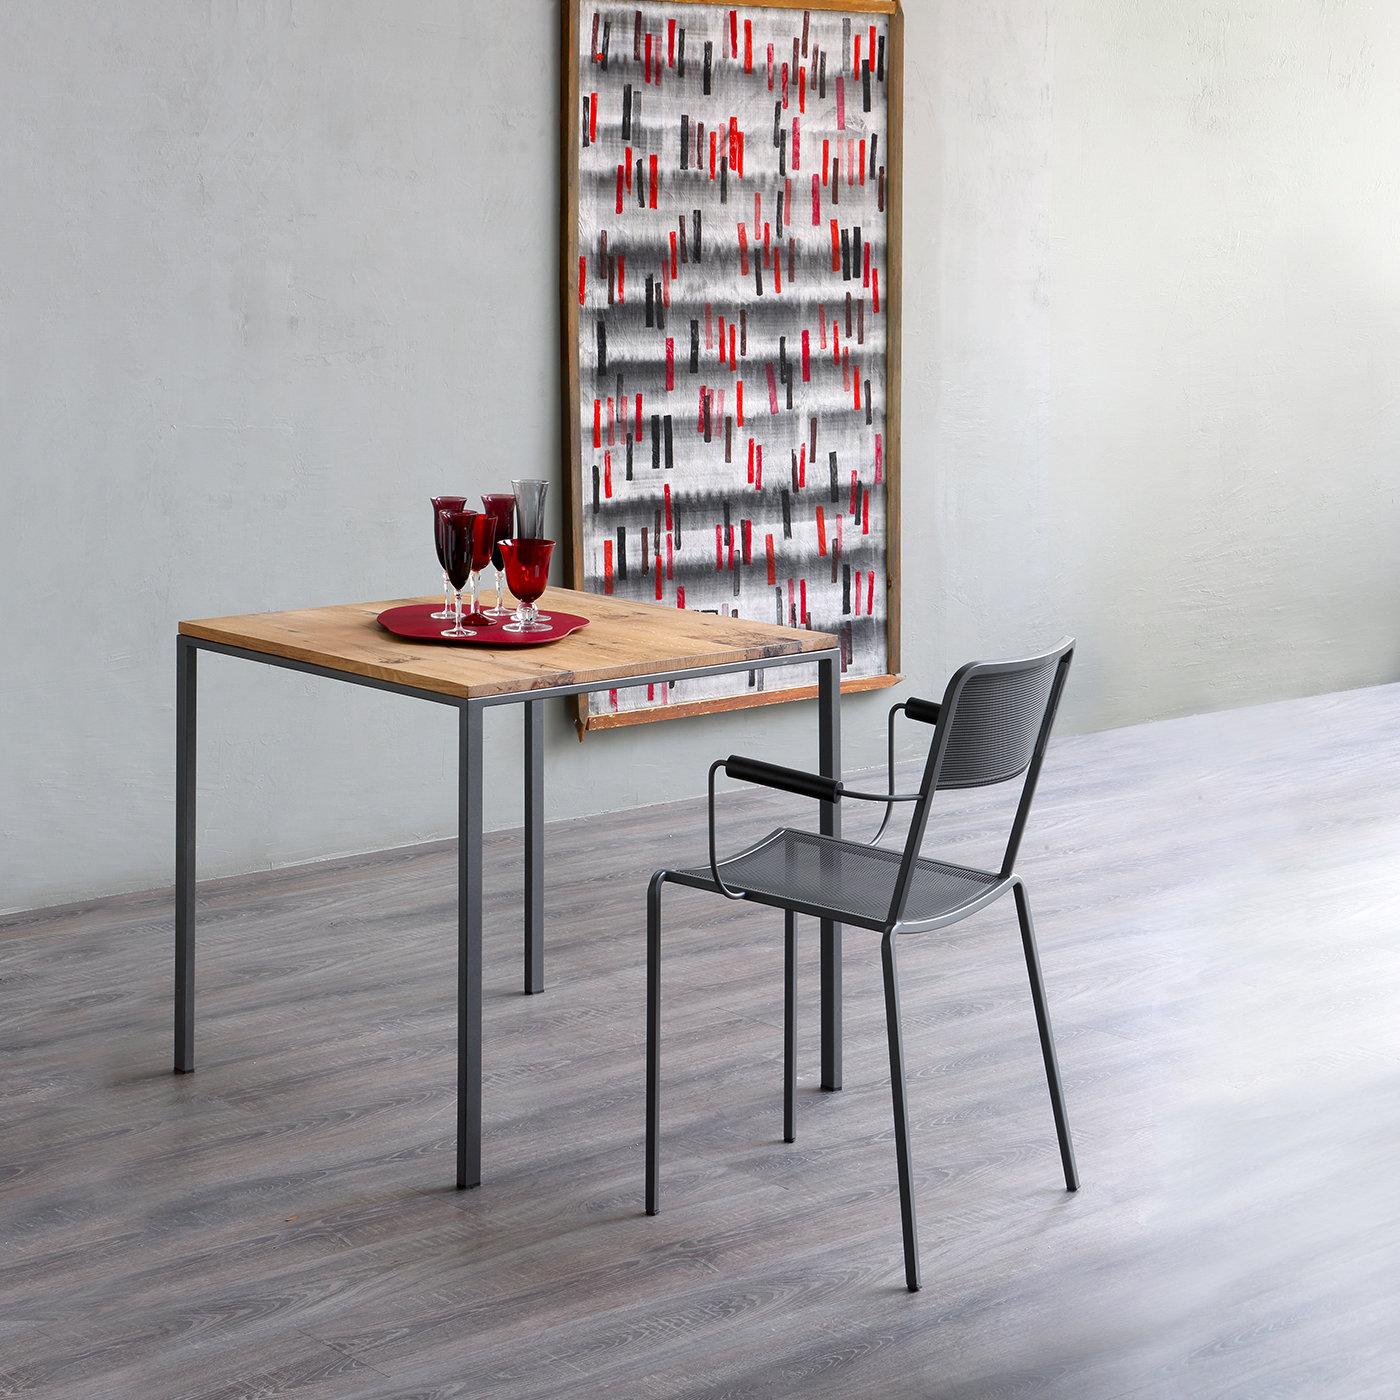 Crafted using modern materials and finishes, the Mini Tavolo Side Table rests on a textured powder-coated metal base and topped in high pressure laminate with a cool rust finish. Giving off a decidedly industrial look and feel, the side table